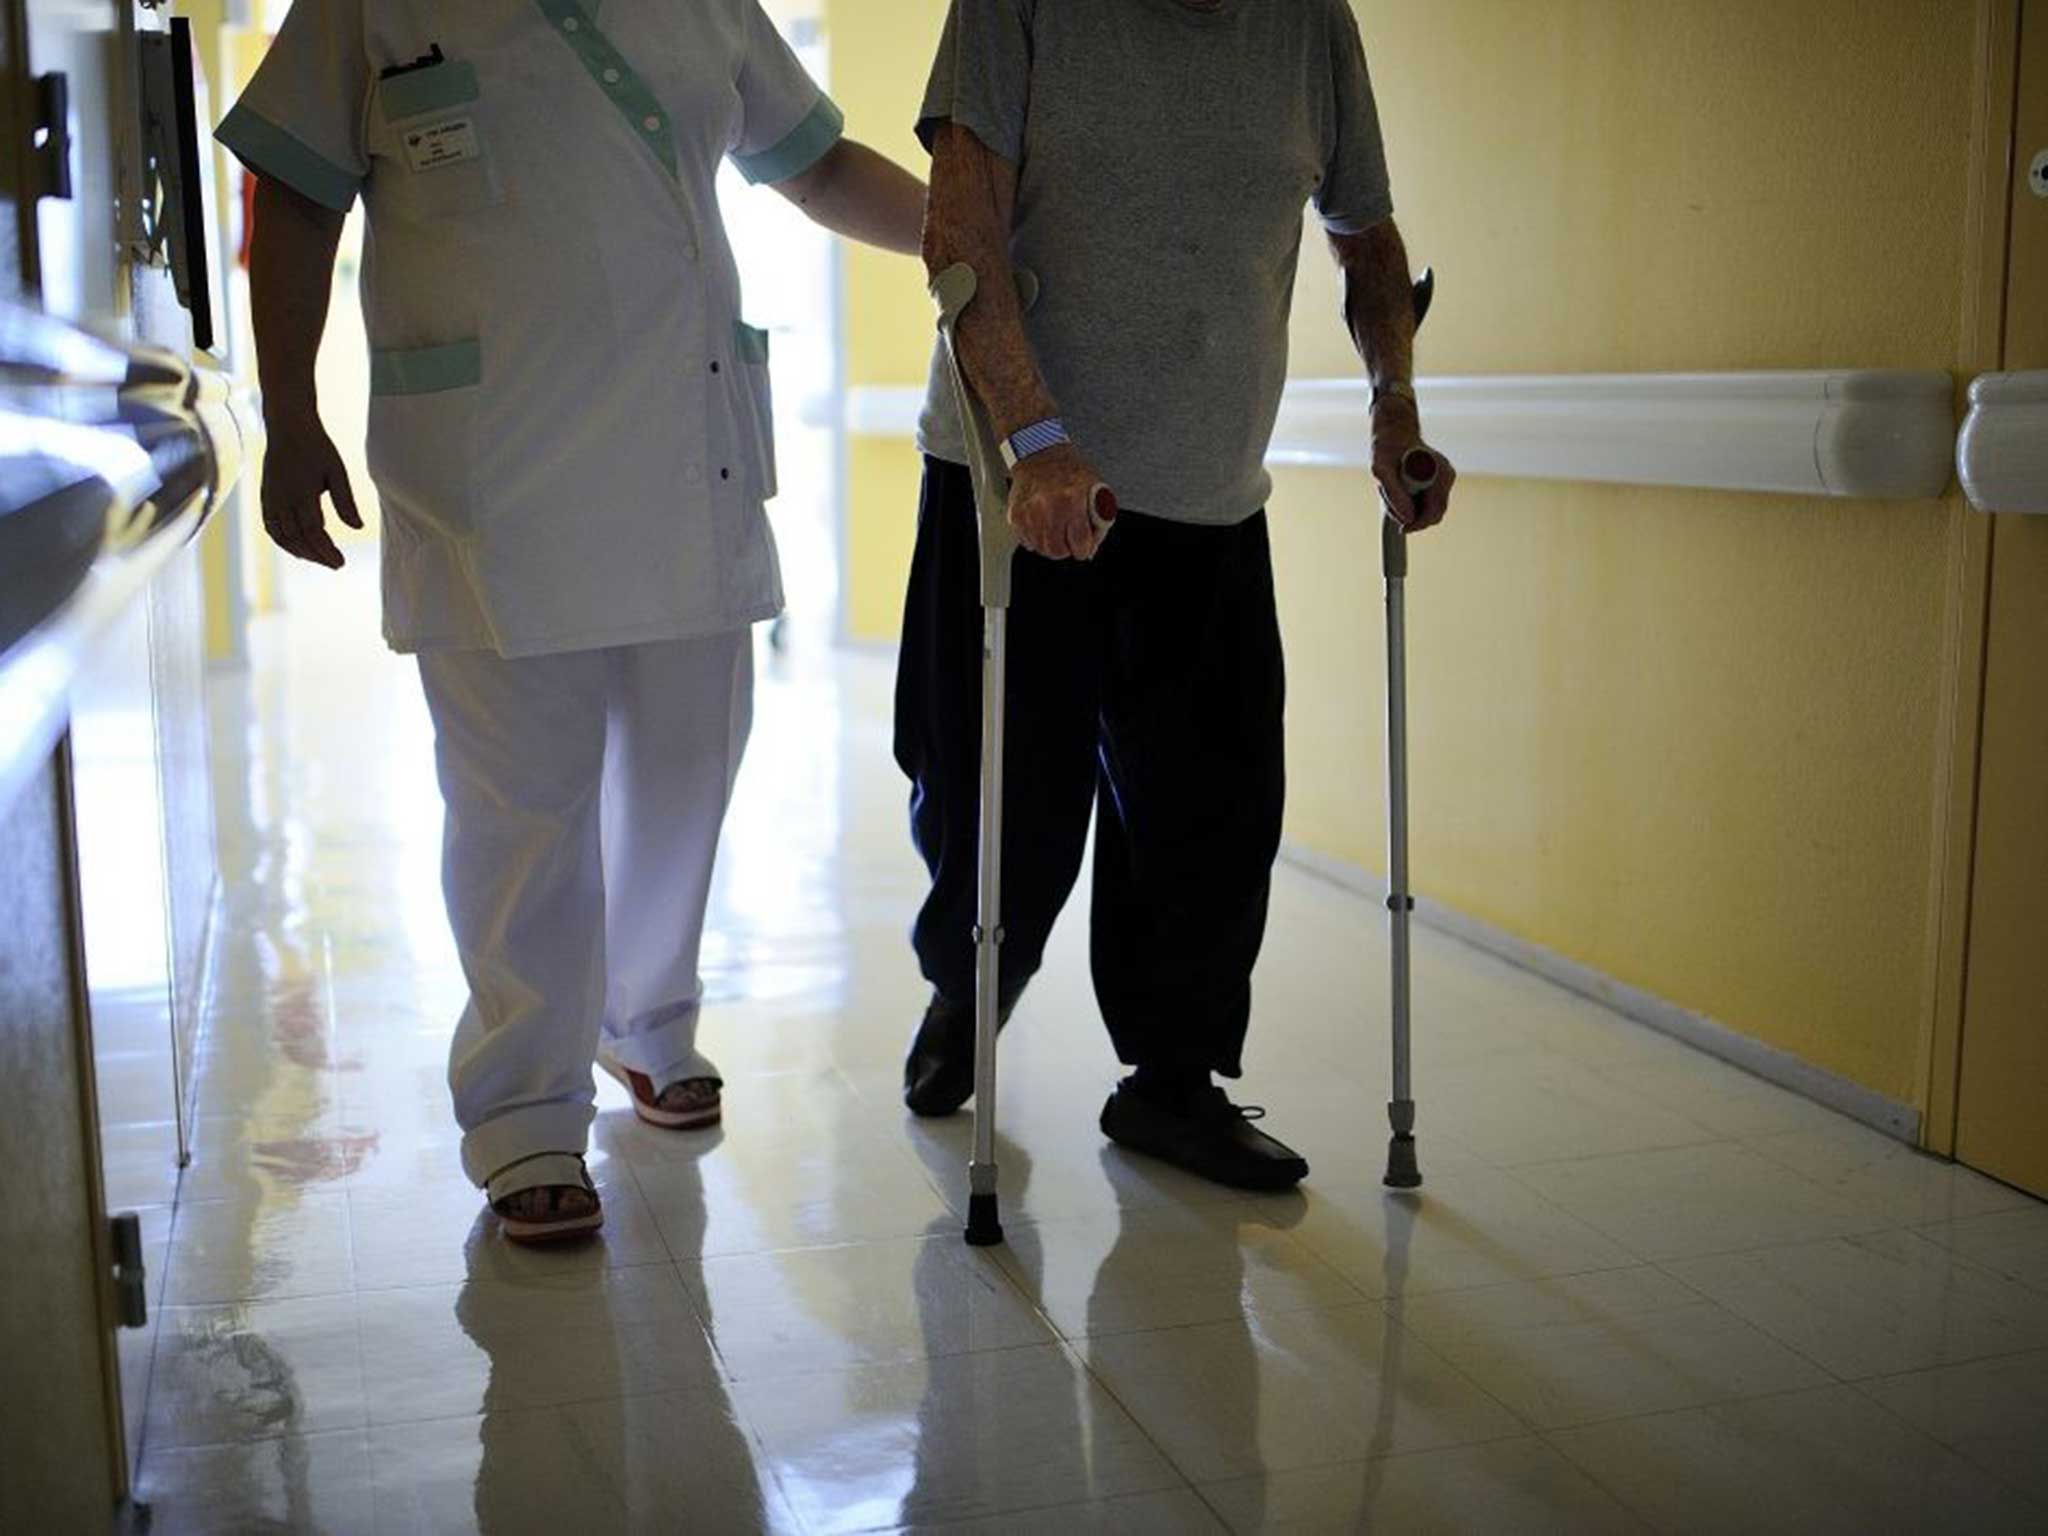 Step change: Younger medics should know more about ageing, say experts